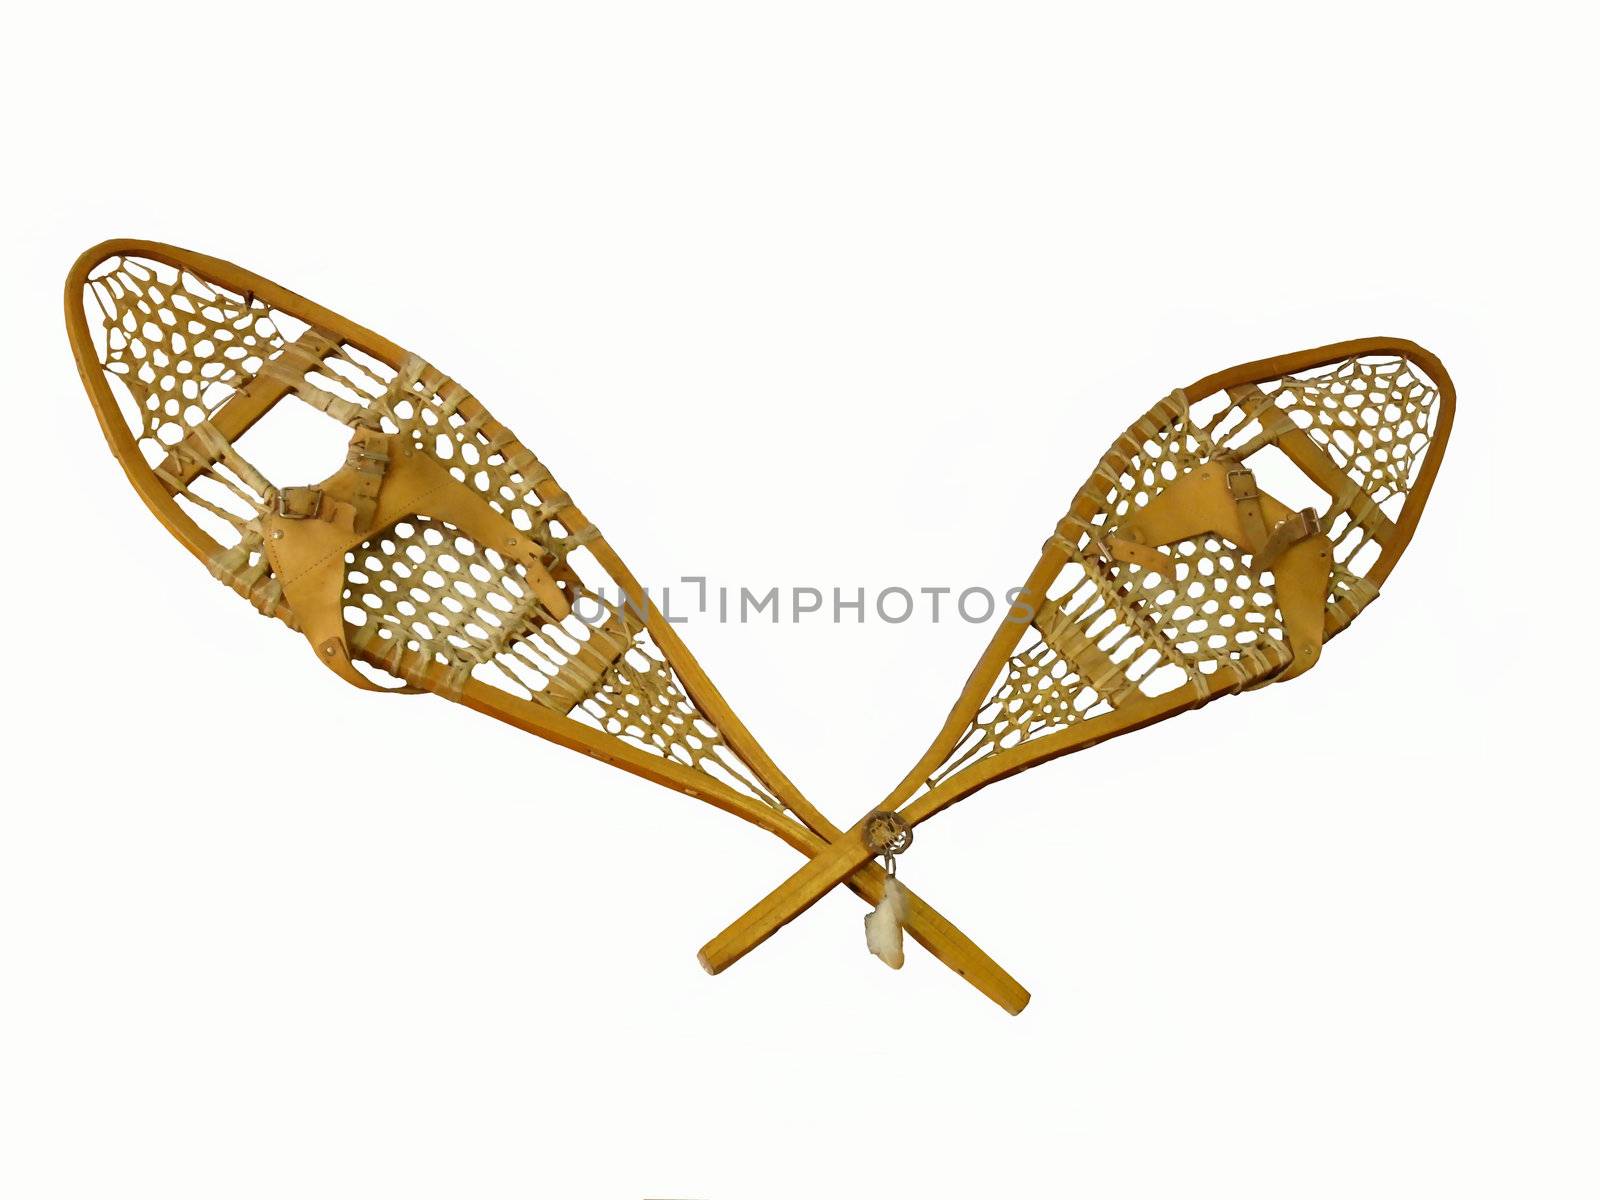 Snowshoes Isolated on White by hicster